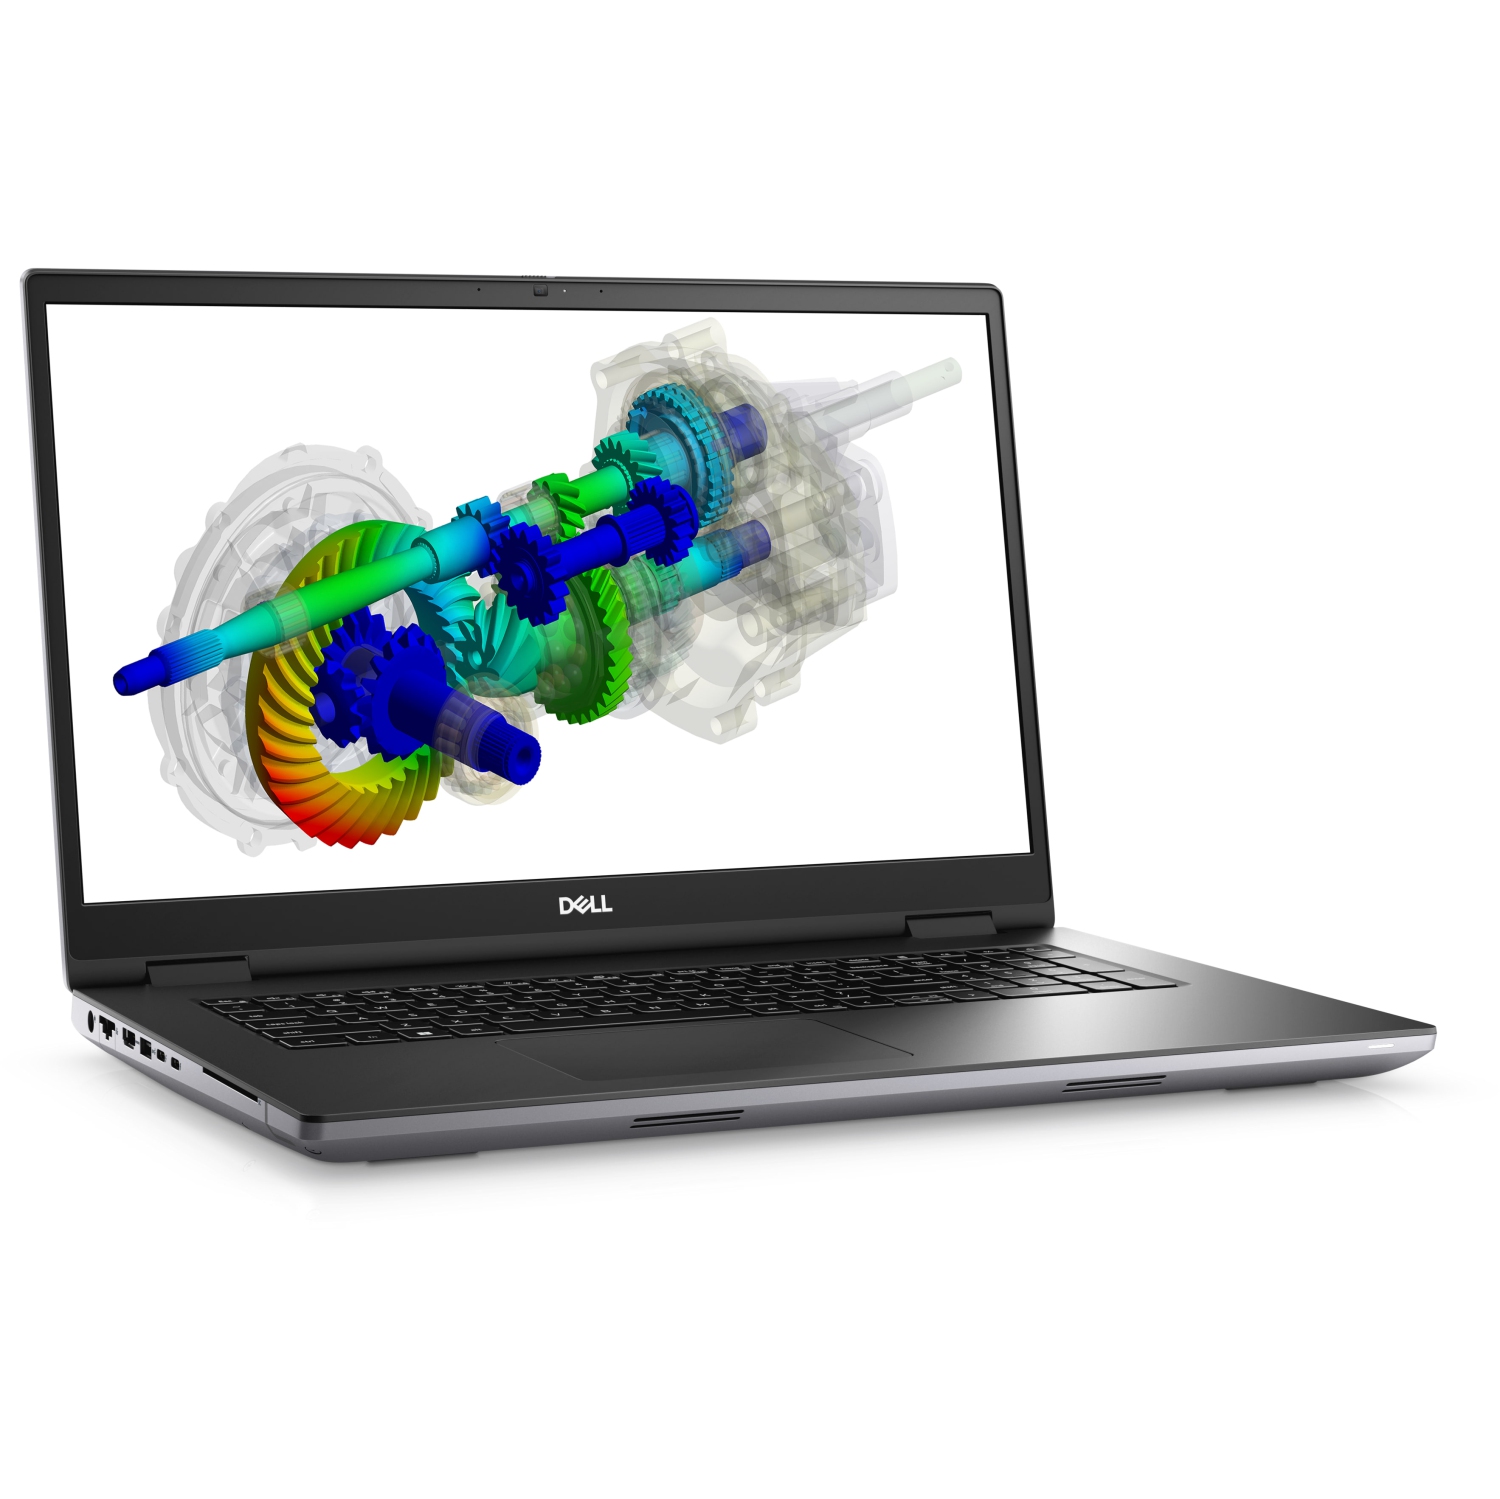 Refurbished (Excellent) – Dell Precision 7000 7770 Workstation Laptop (2022) | 17.3" FHD | Core i7 - 2TB SSD - 64GB RAM - RTX A4500 | 16 Cores @ 4.8 GHz - 12th Gen CPU - 16GB GDDR6